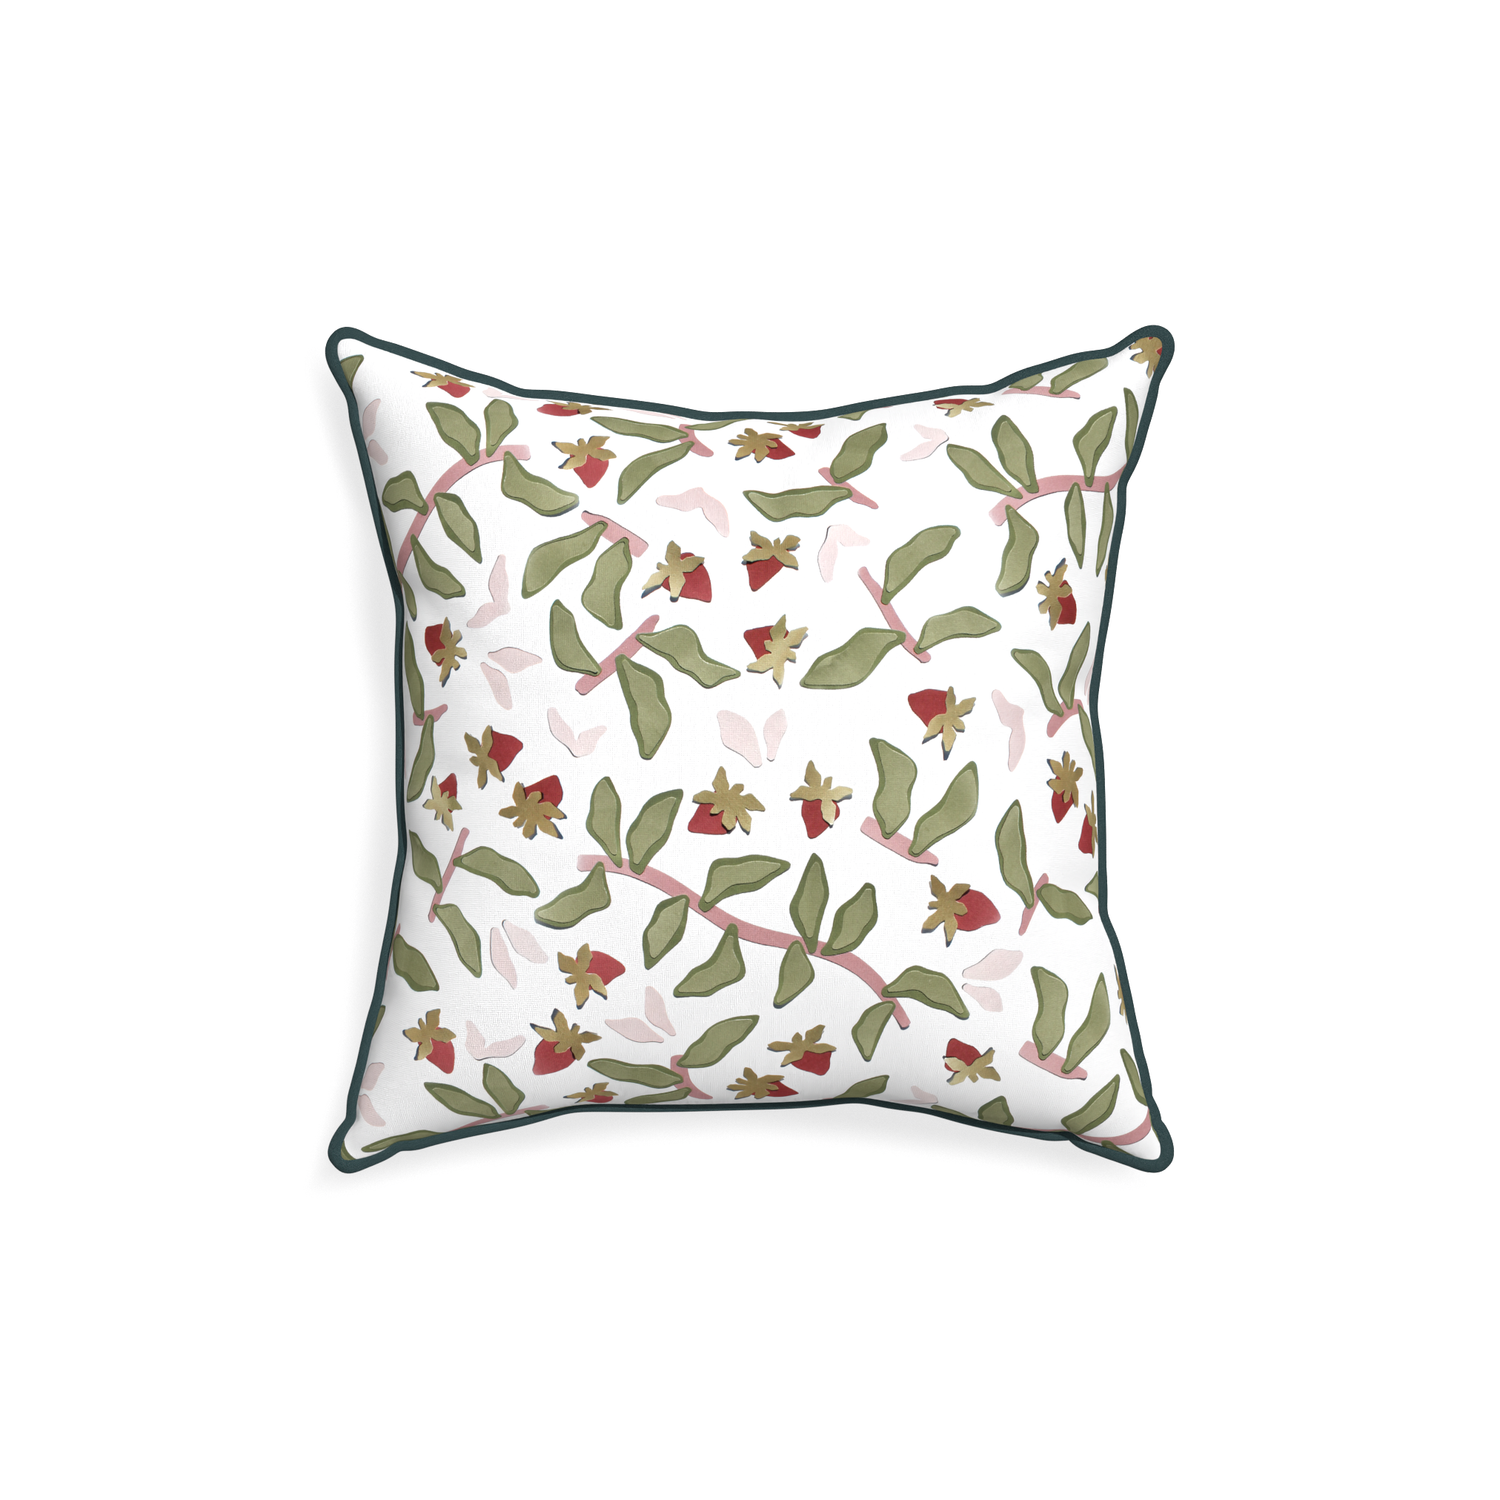 18-square nellie custom strawberry & botanicalpillow with p piping on white background